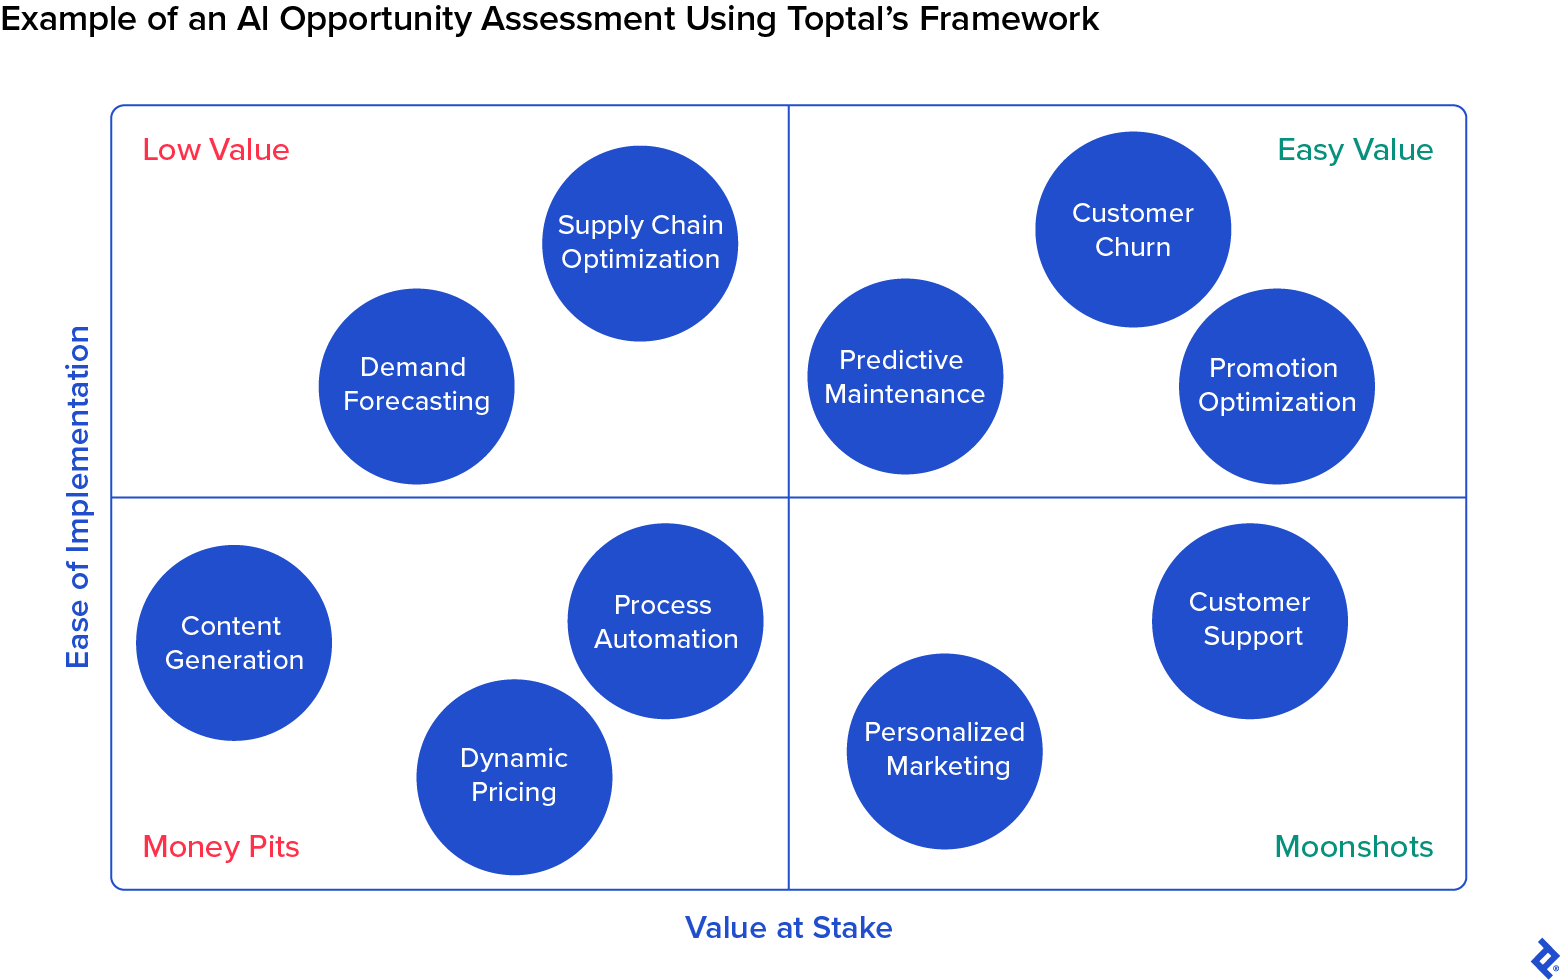 The Toptal framework for assessing AI initiatives is broken into four quadrants: low value, easy value, money pits, and moonshots.